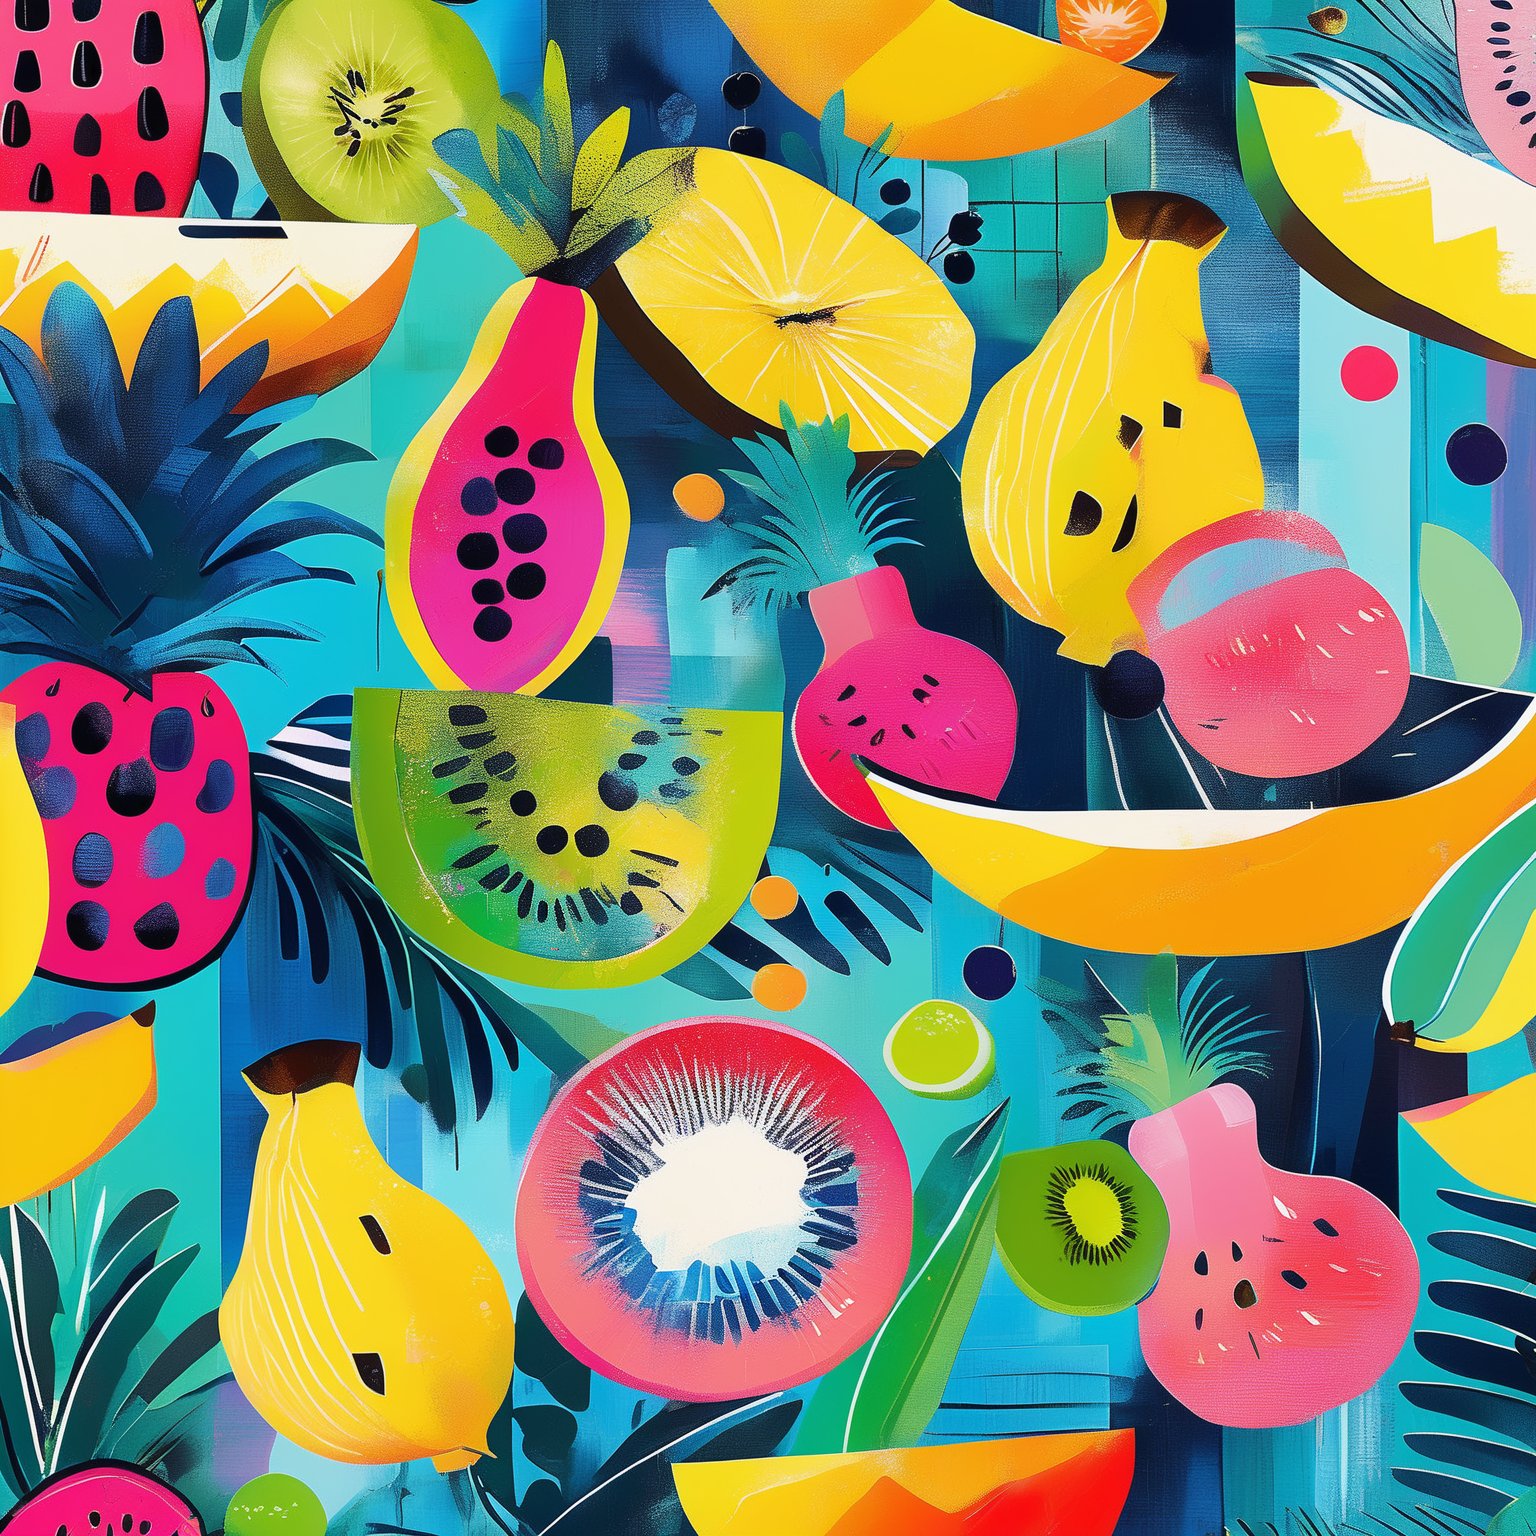 A vibrant and colorful collage of various tropical fruits and elements. Dominating the scene are slices of watermelon, pineapple, and kiwi. There are also abstract representations of bananas, grapes, and leaves. The fruits are depicted in a modern, abstract style with bold brush strokes and a mix of bright and muted colors. The background is a blend of pastel shades, providing a contrast to the bold colors of the fruits.